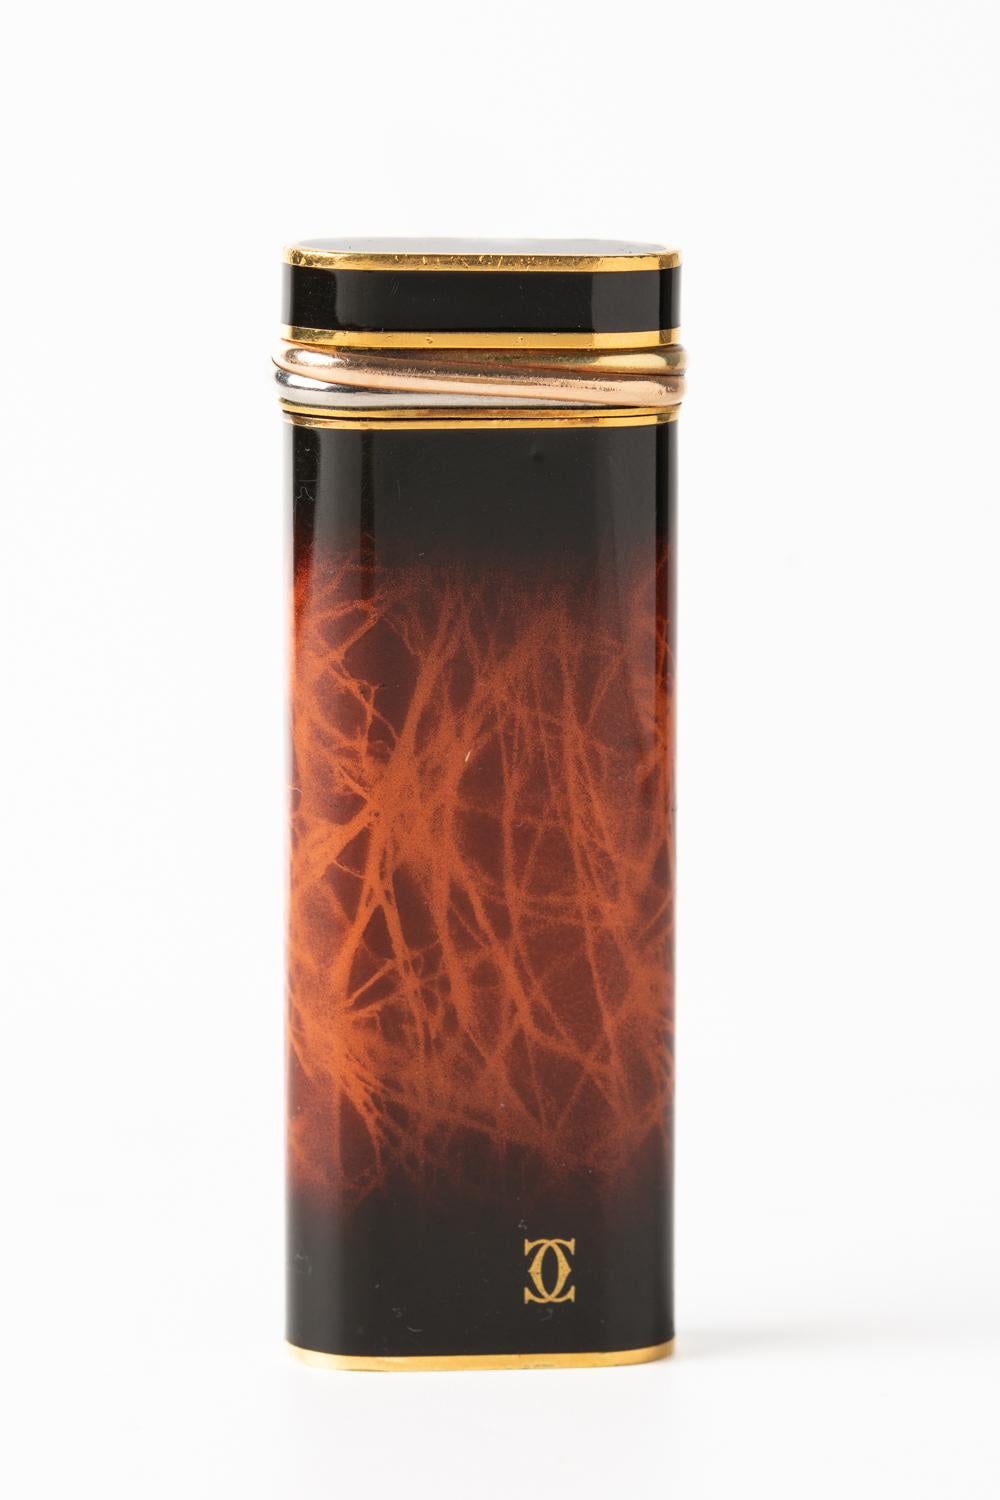 Very rare and luxurious classic Cartier “Trinity” lighter with a light brown flame design and three ring band at the top.  Inscribed with 'Cartier Paris' along the bottom edge with a serial number: 90279X. The lighter 

The lighter is in working